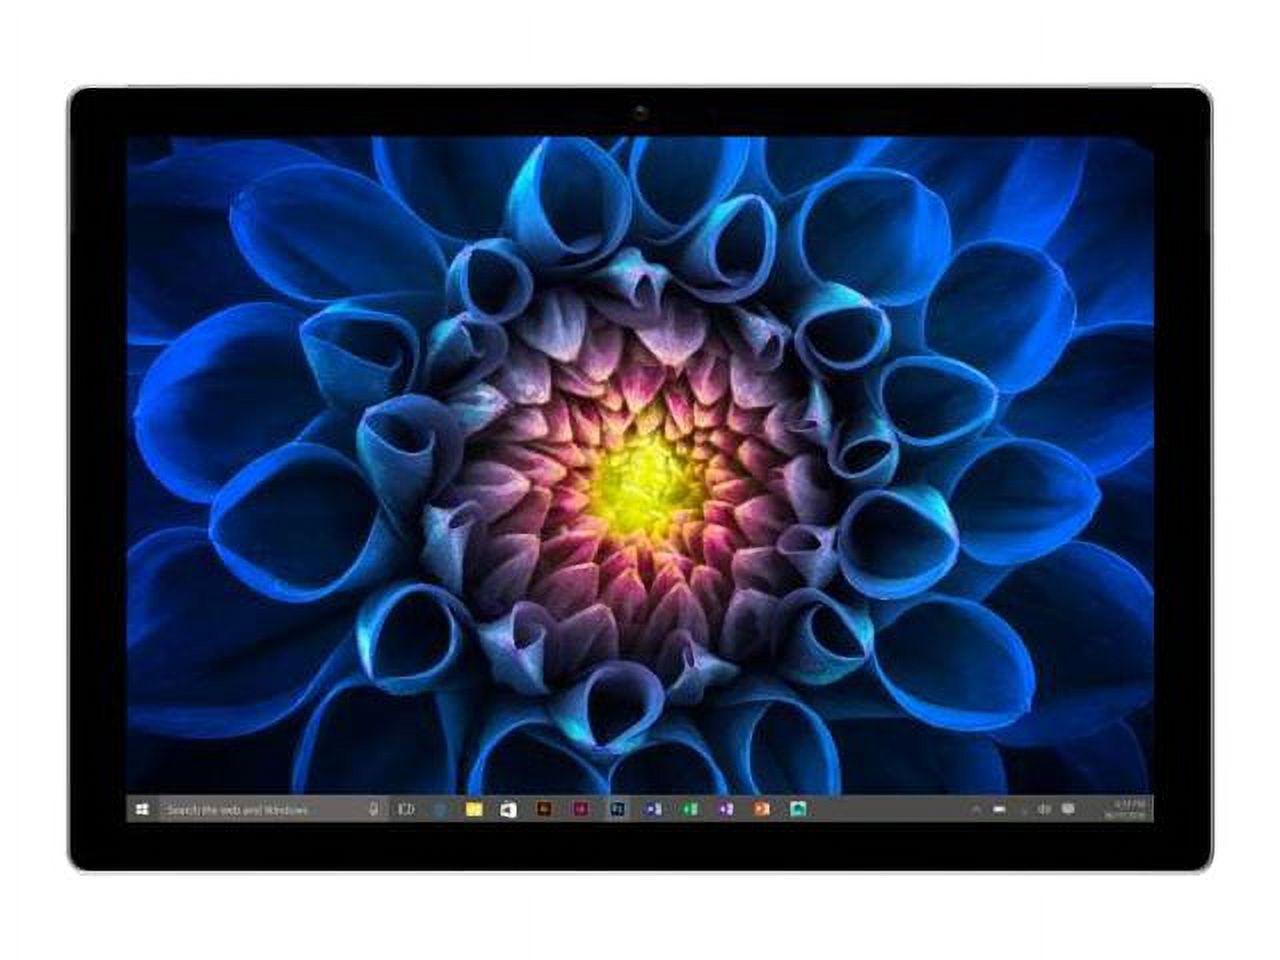 Microsoft Surface Pro 4 - Tablet - Core i7 6650U / 2.2 GHz - Win 10 Pro 64-bit - 16 GB RAM - 512 GB SSD - 12.3" touchscreen 2736 x 1824 - Iris Graphics 540 - Wi-Fi 5 - silver - Used - commercial - image 2 of 6